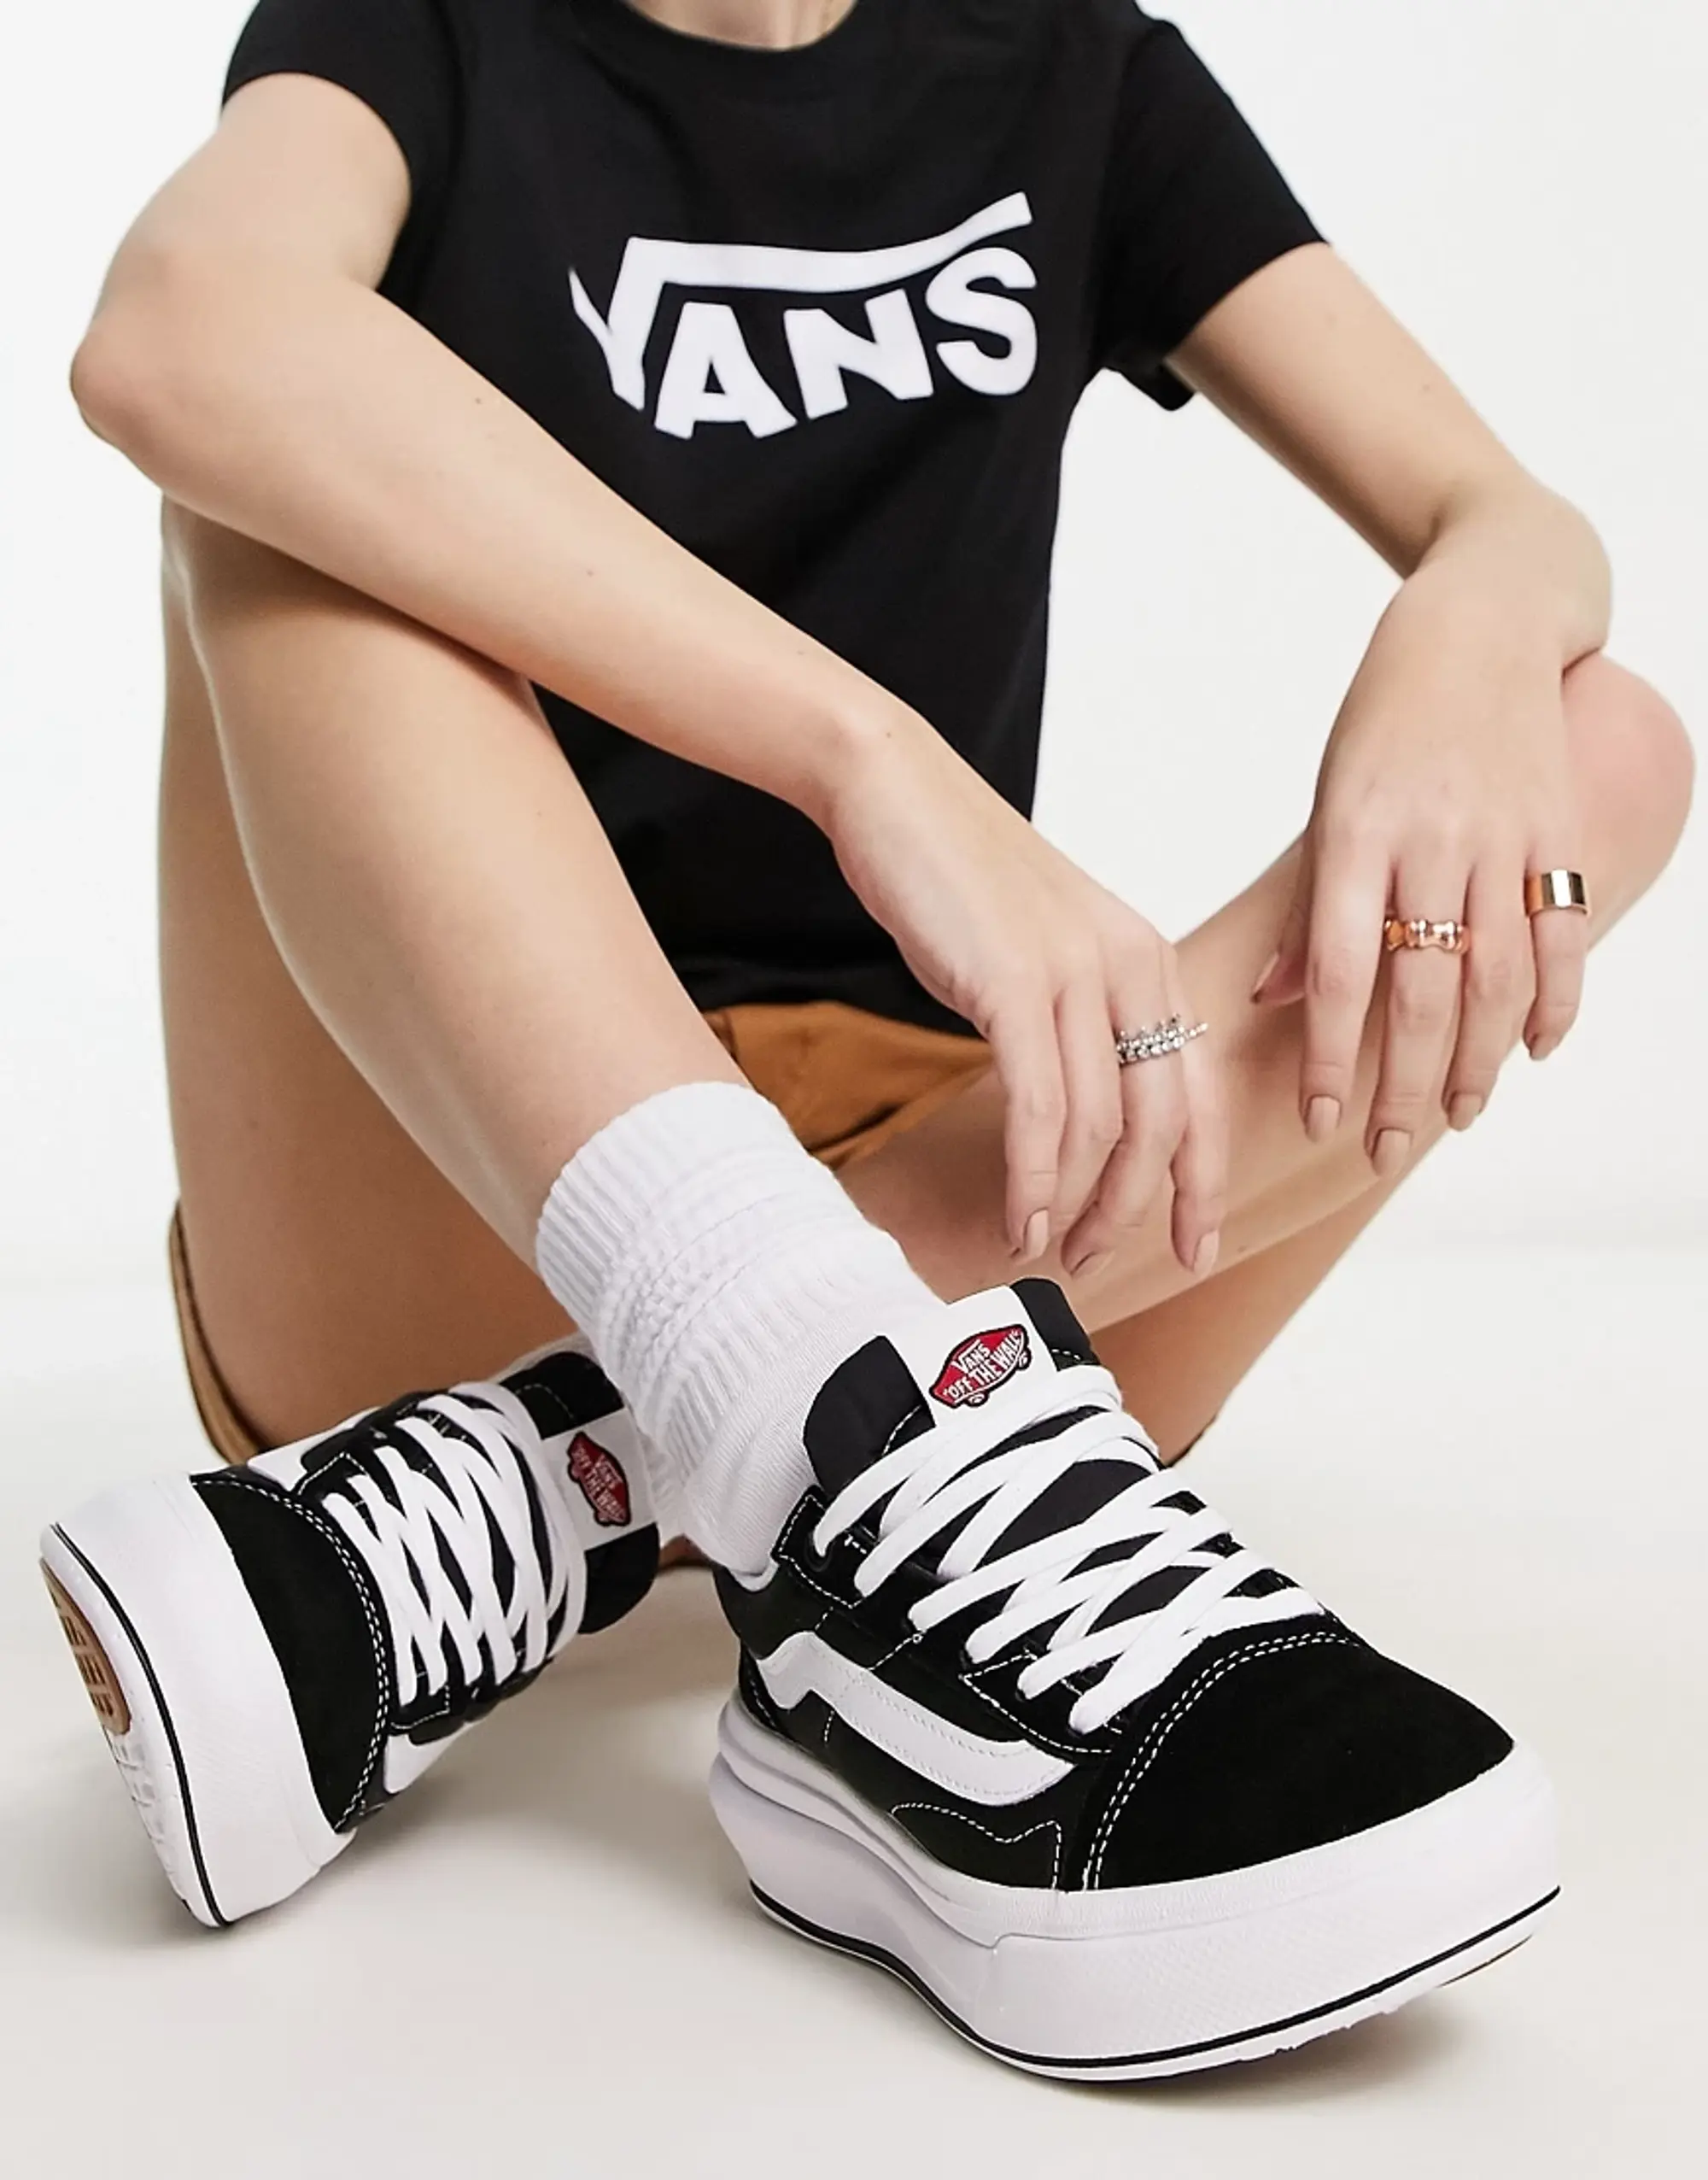 Vans Old Skool Overt Trainers In Black And White